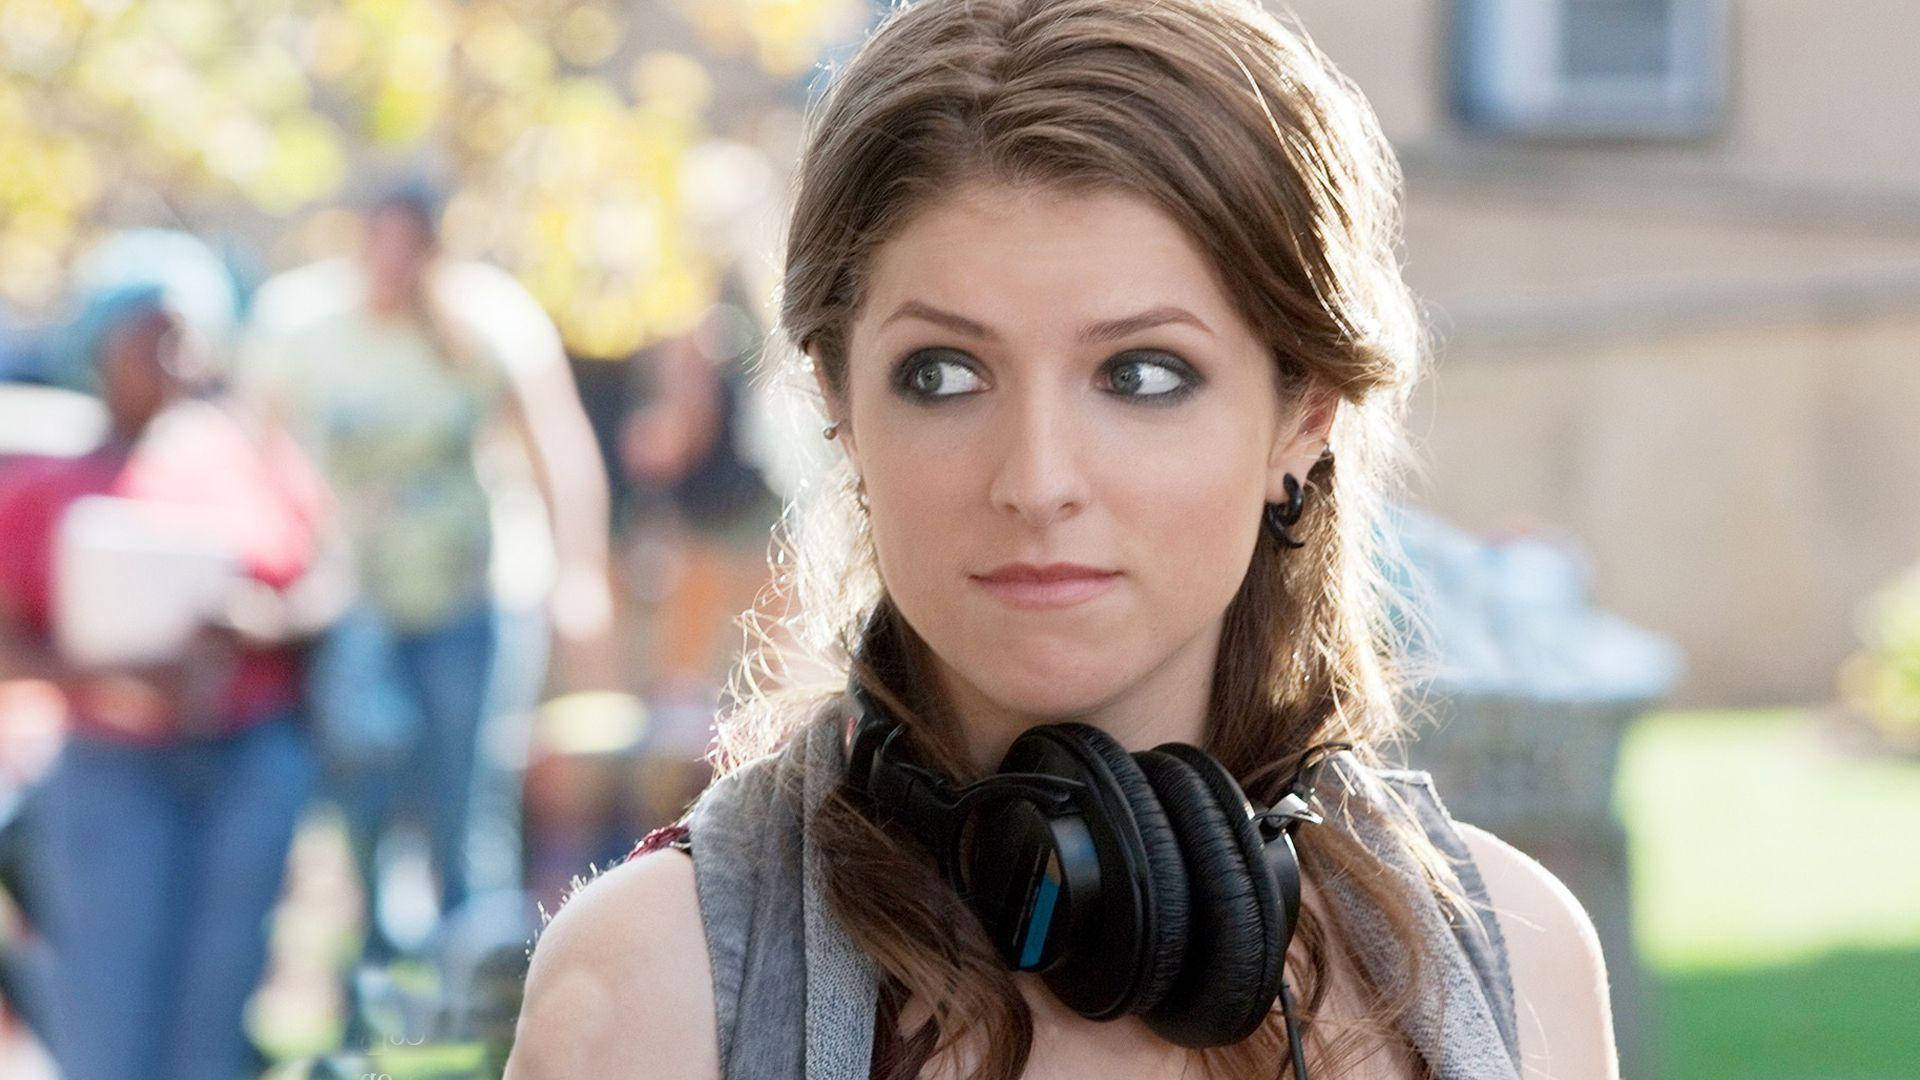 Anna Kendrick As Beca In Pitch Perfect